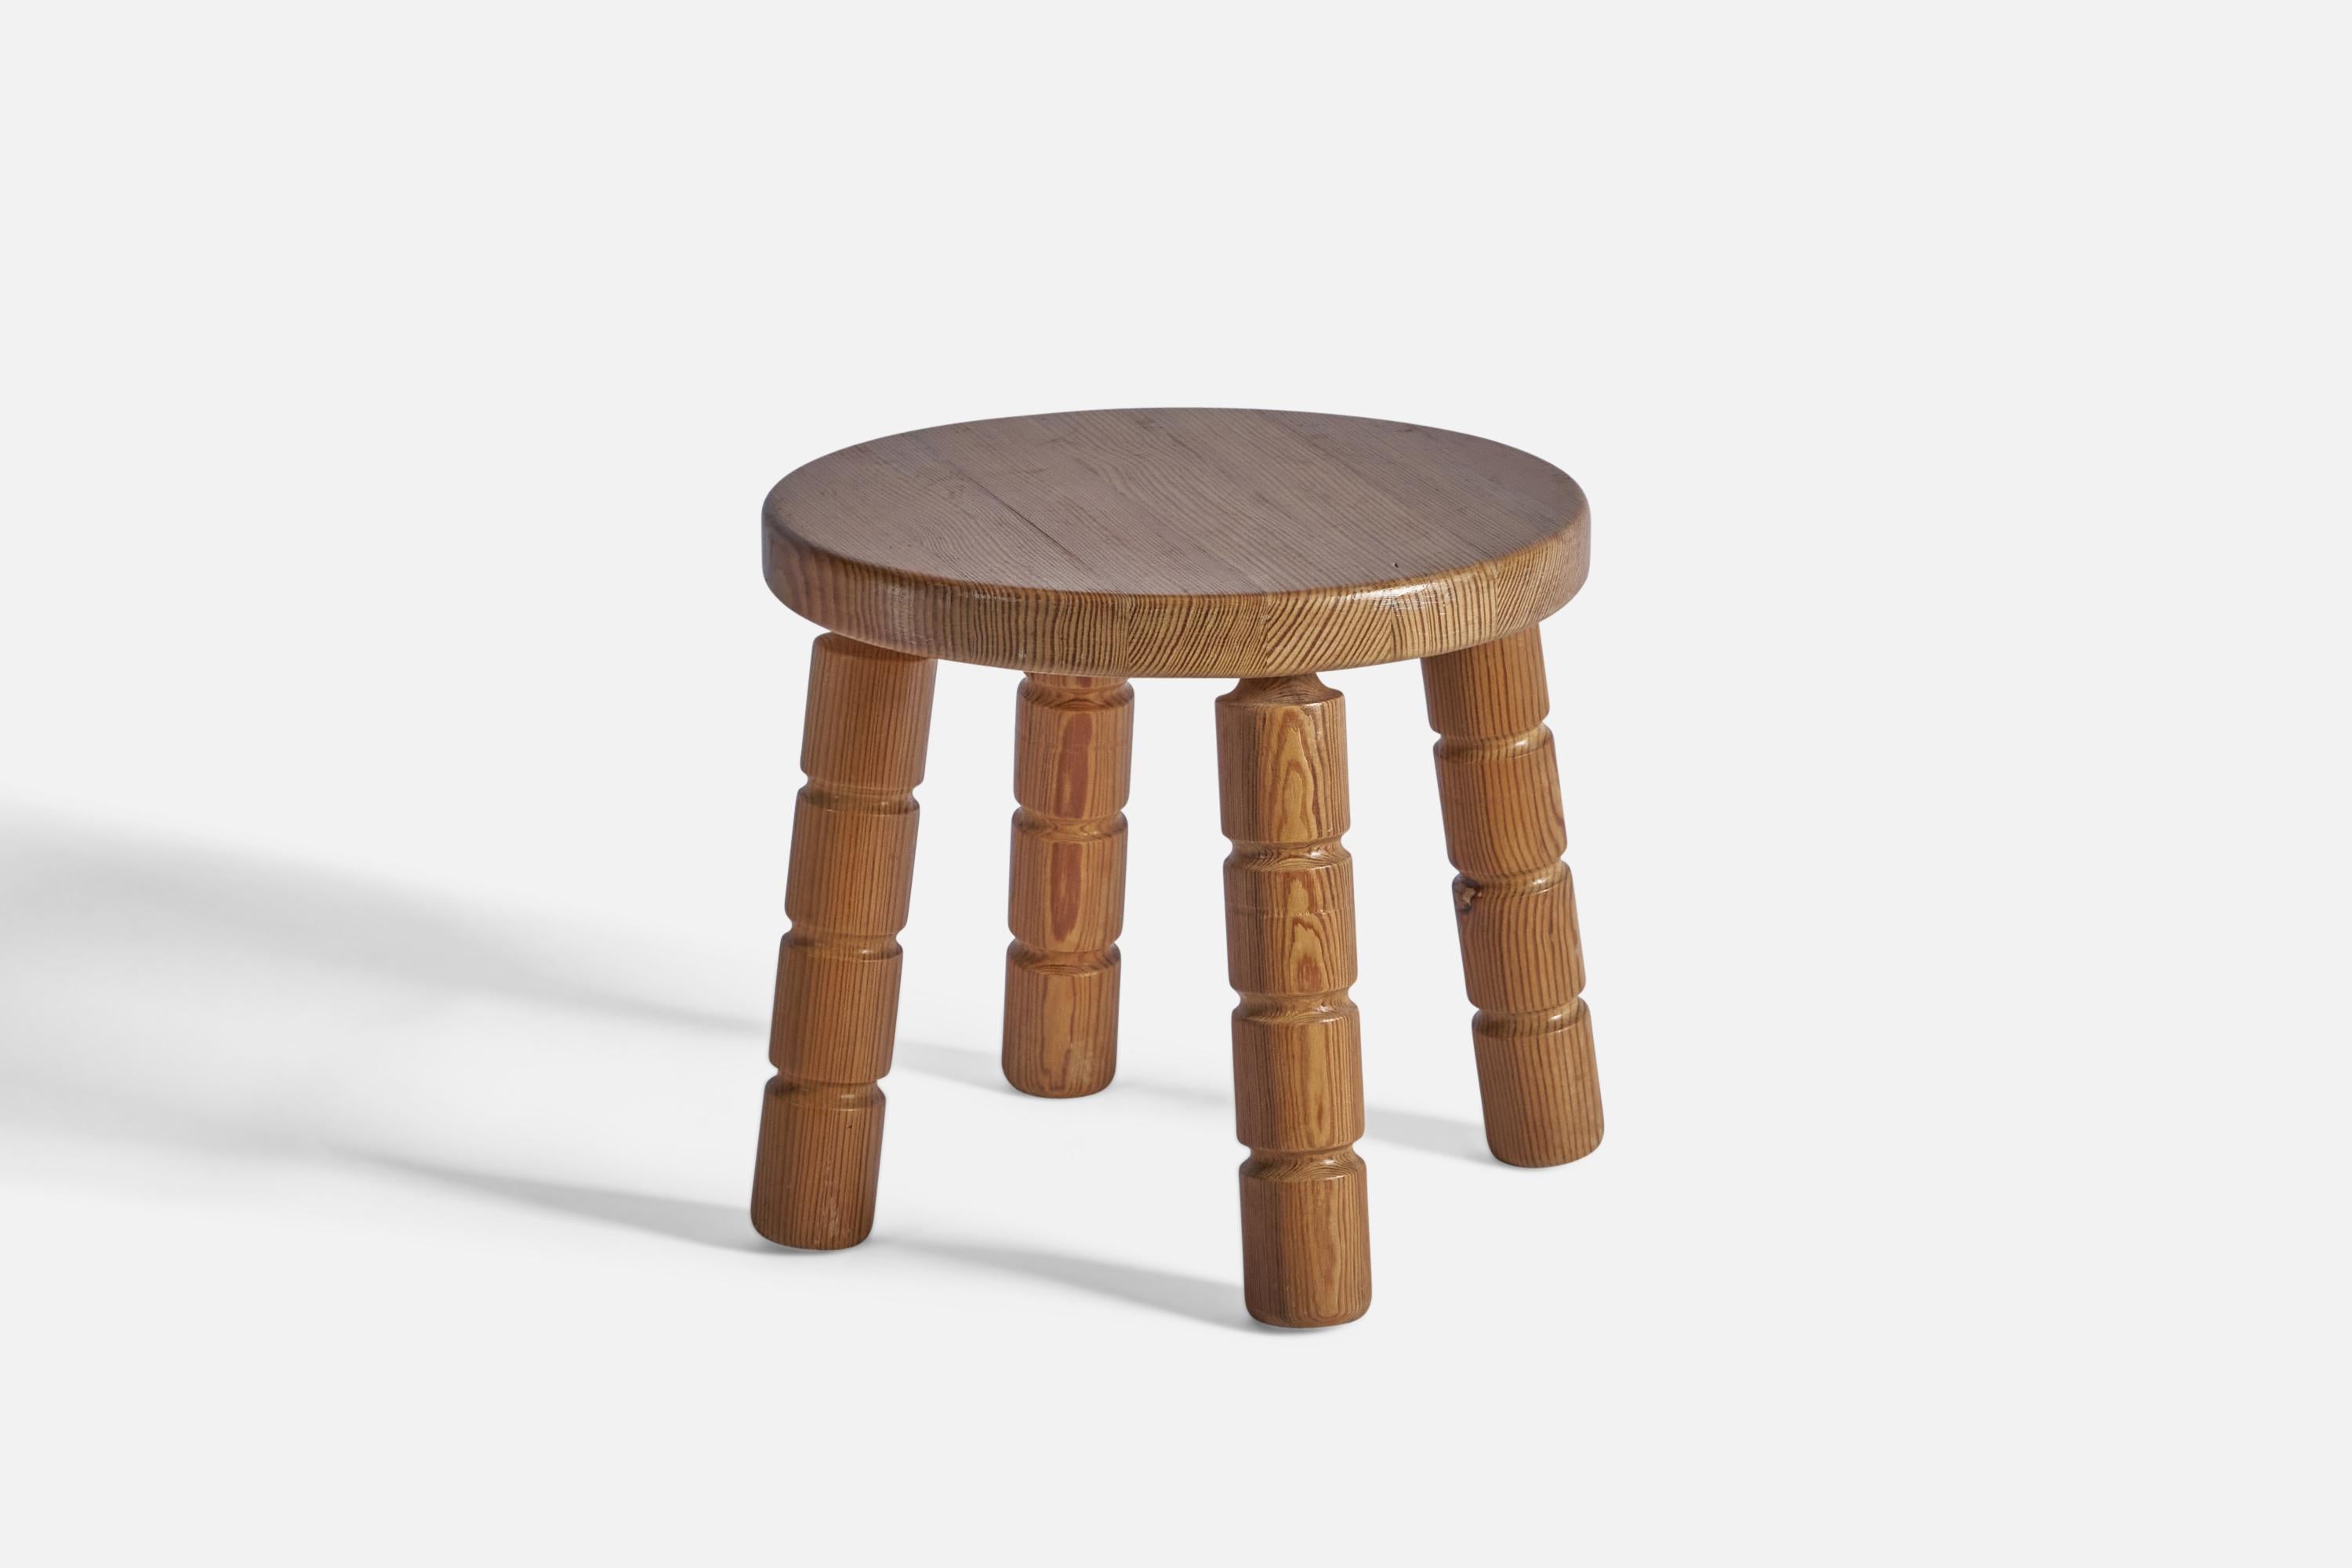 A solid pine stool, designed and produced in Sweden, c. 1970s.